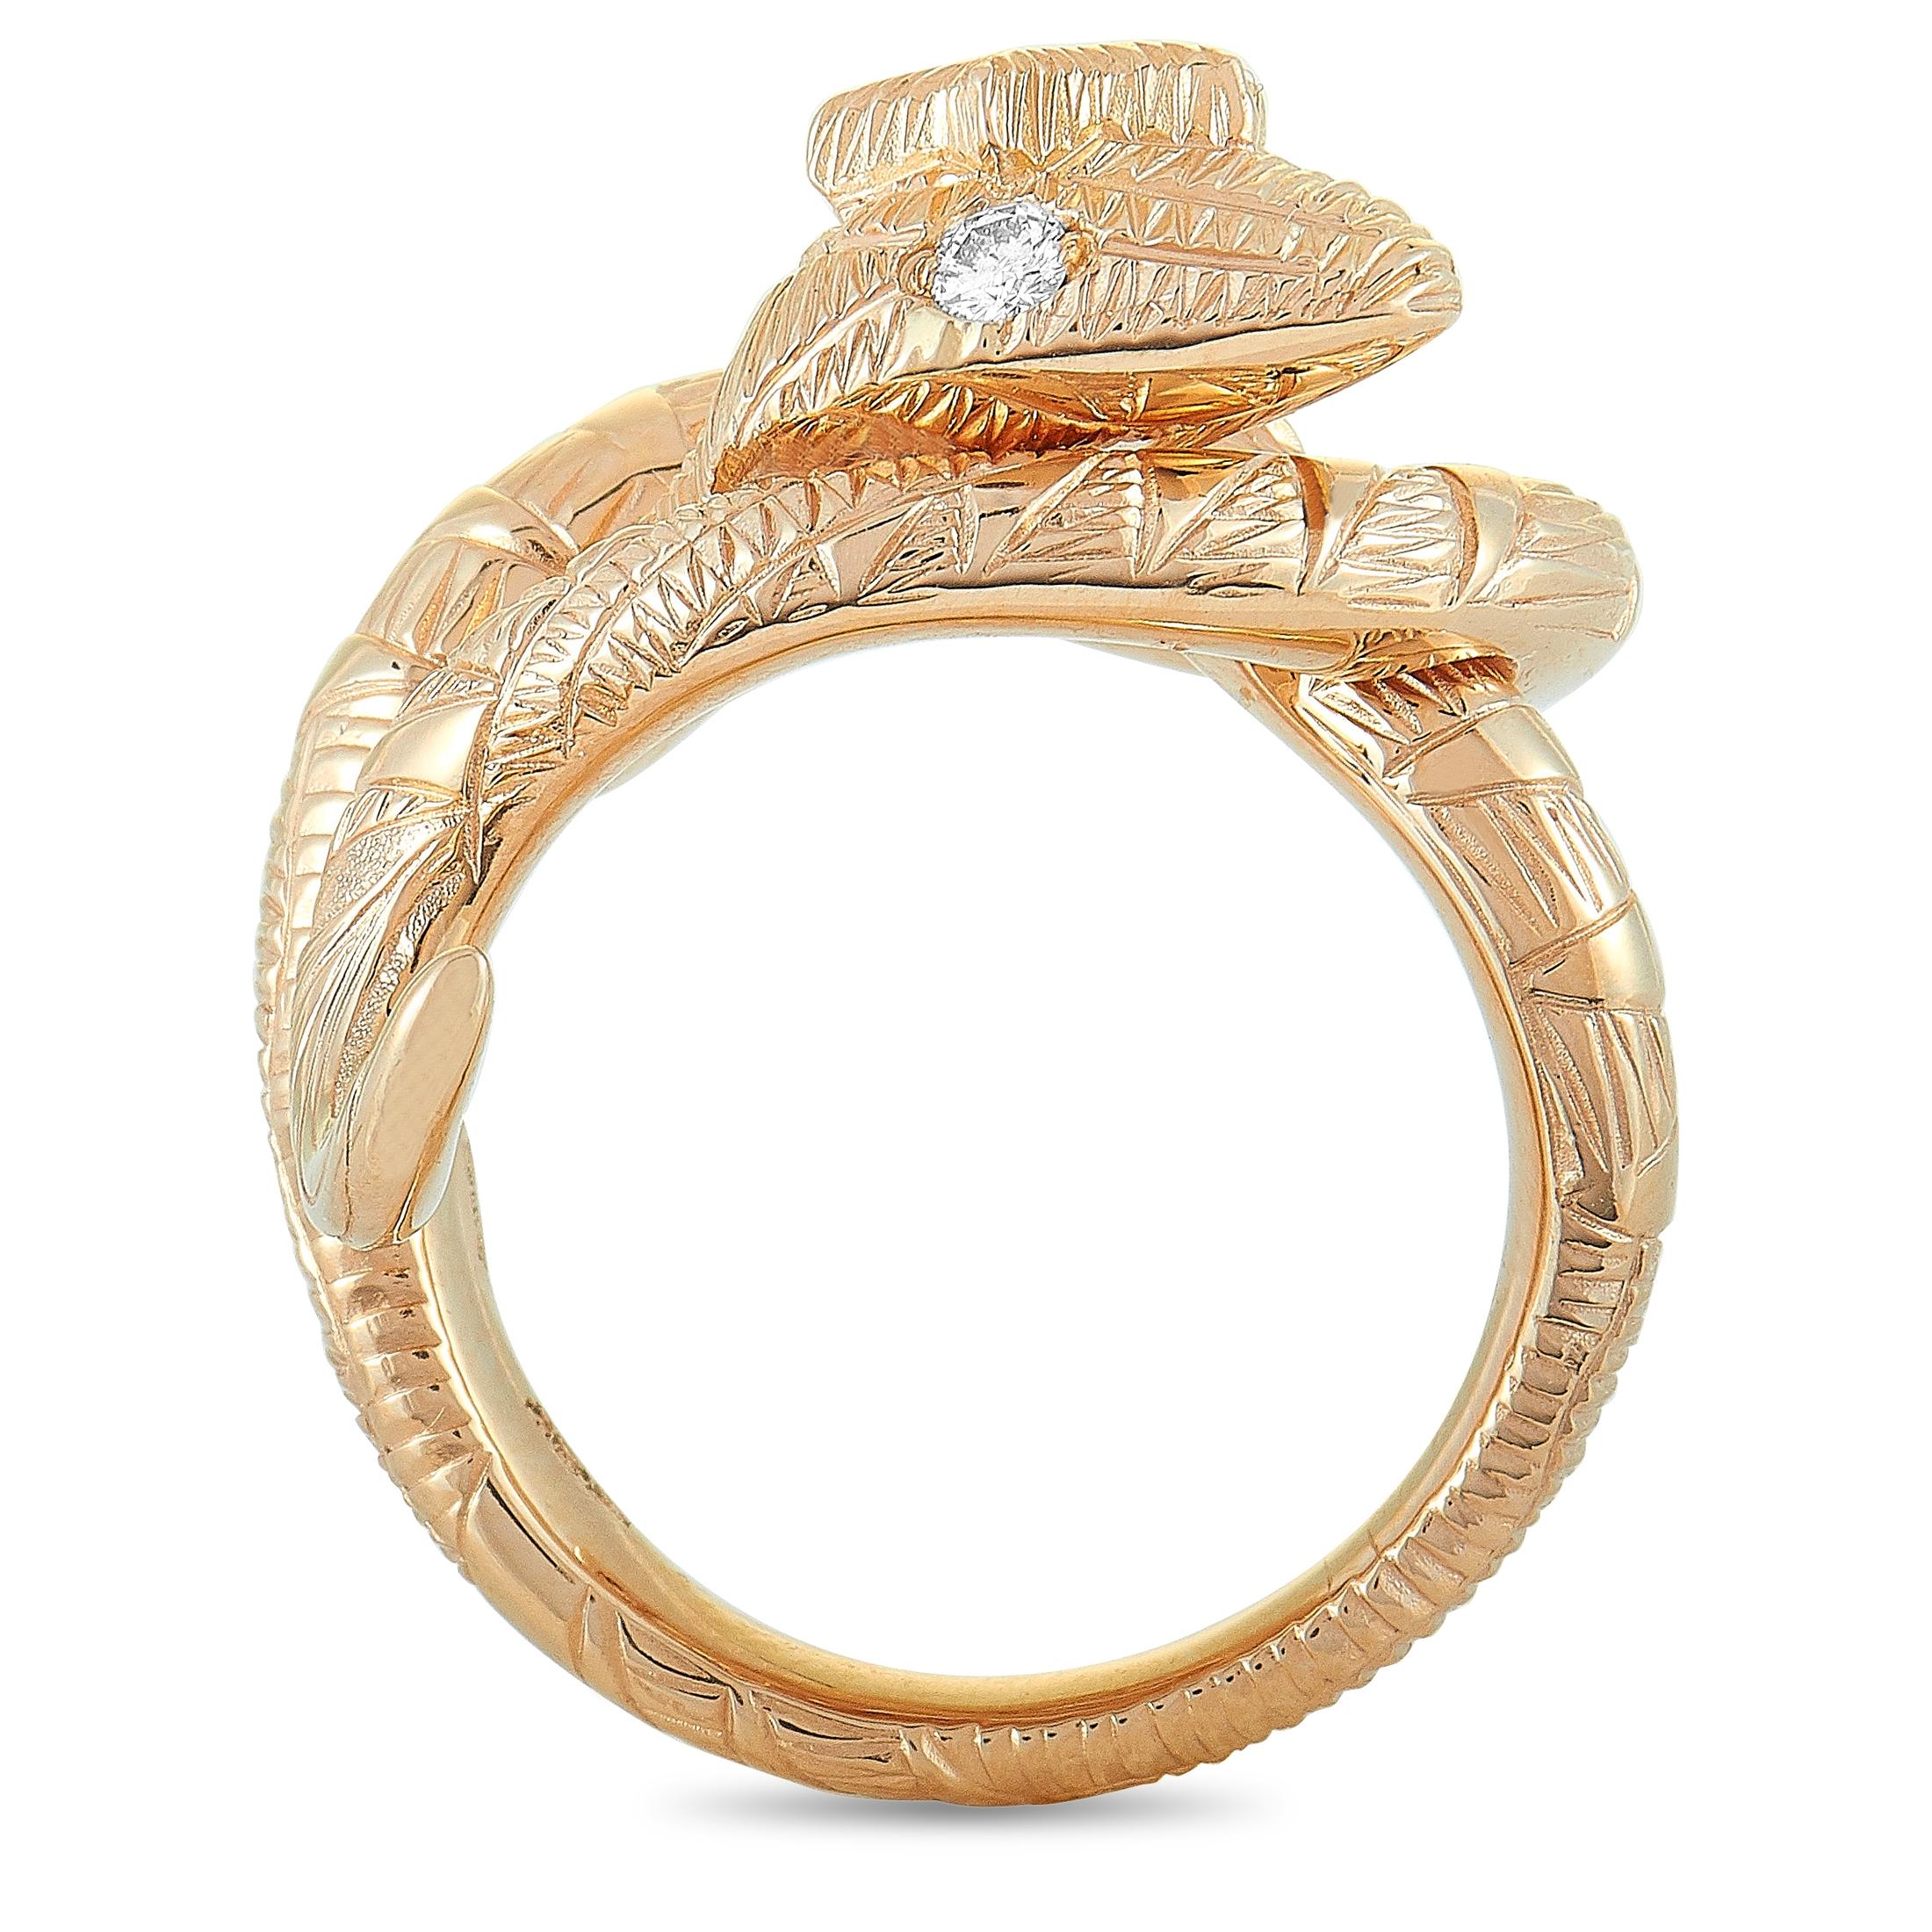 The “Le Marché Des Merveilles” ring by Gucci is made out of 18K rose gold and diamonds and weighs 17.4 grams. The ring boasts band thickness of 4 mm and top height of 10 mm, while top dimensions measure 20 by 17 mm.

This item is offered in brand